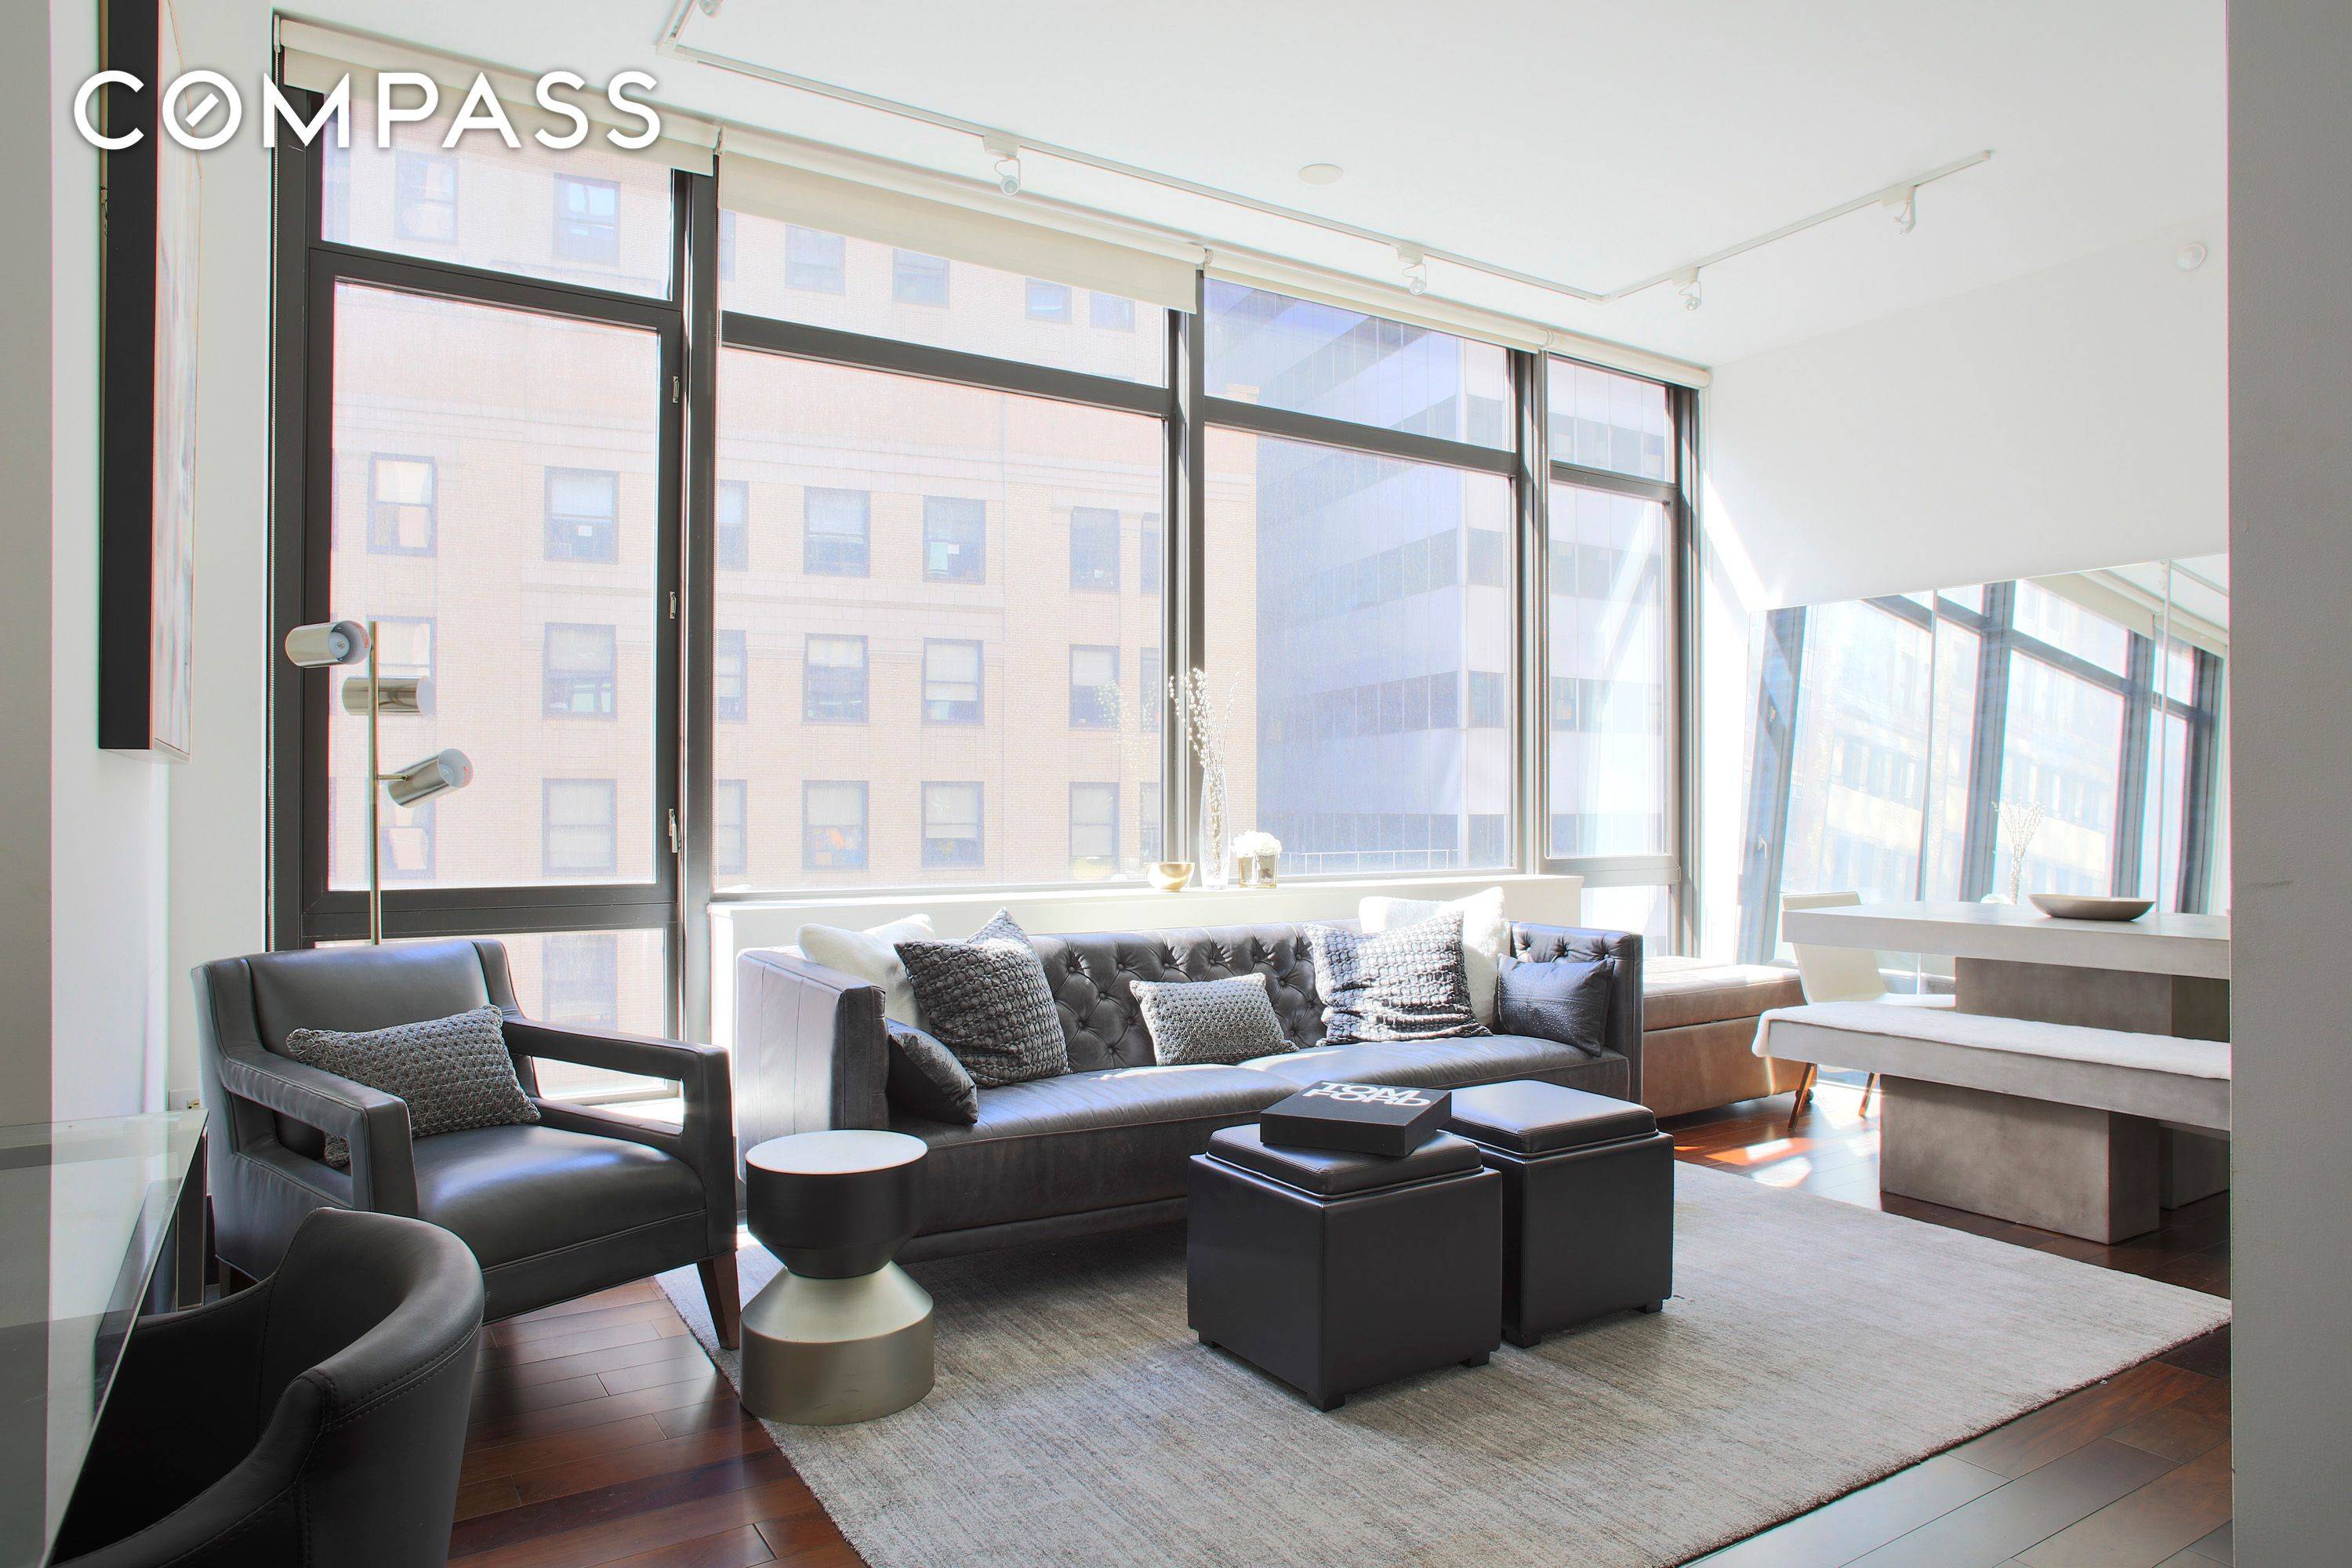 This modern luxury rare and private A line is an oversized one bedroom with Floor to ceiling windows features soaring 10 foot ceilings and one and a half bathrooms.